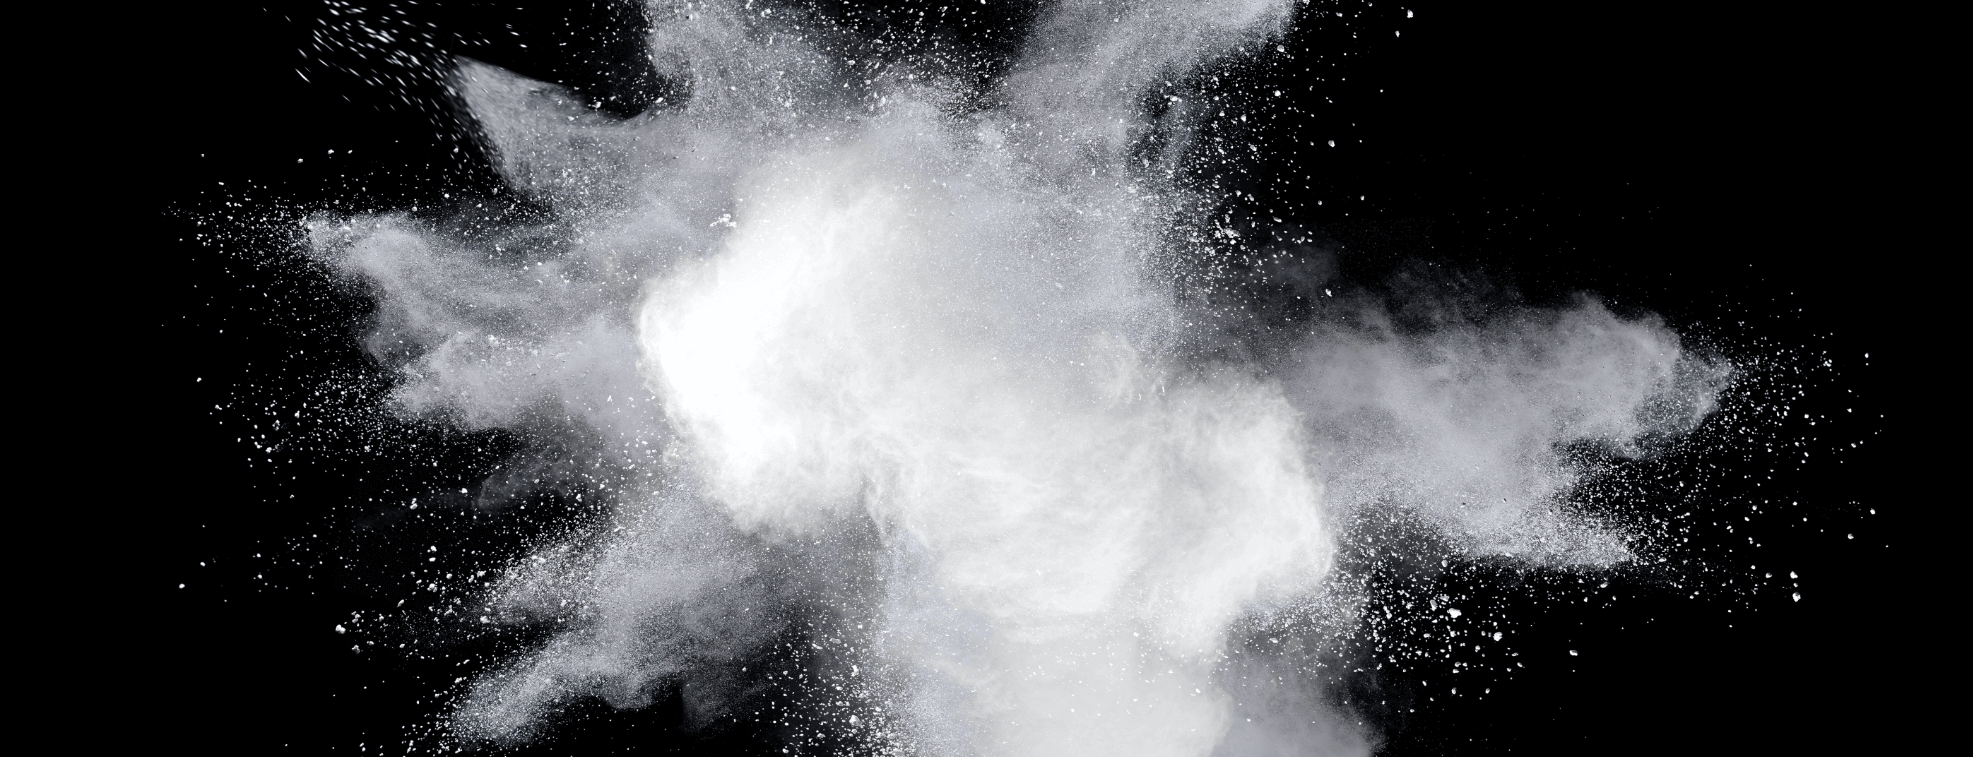 White smoke=looking paint over a black background